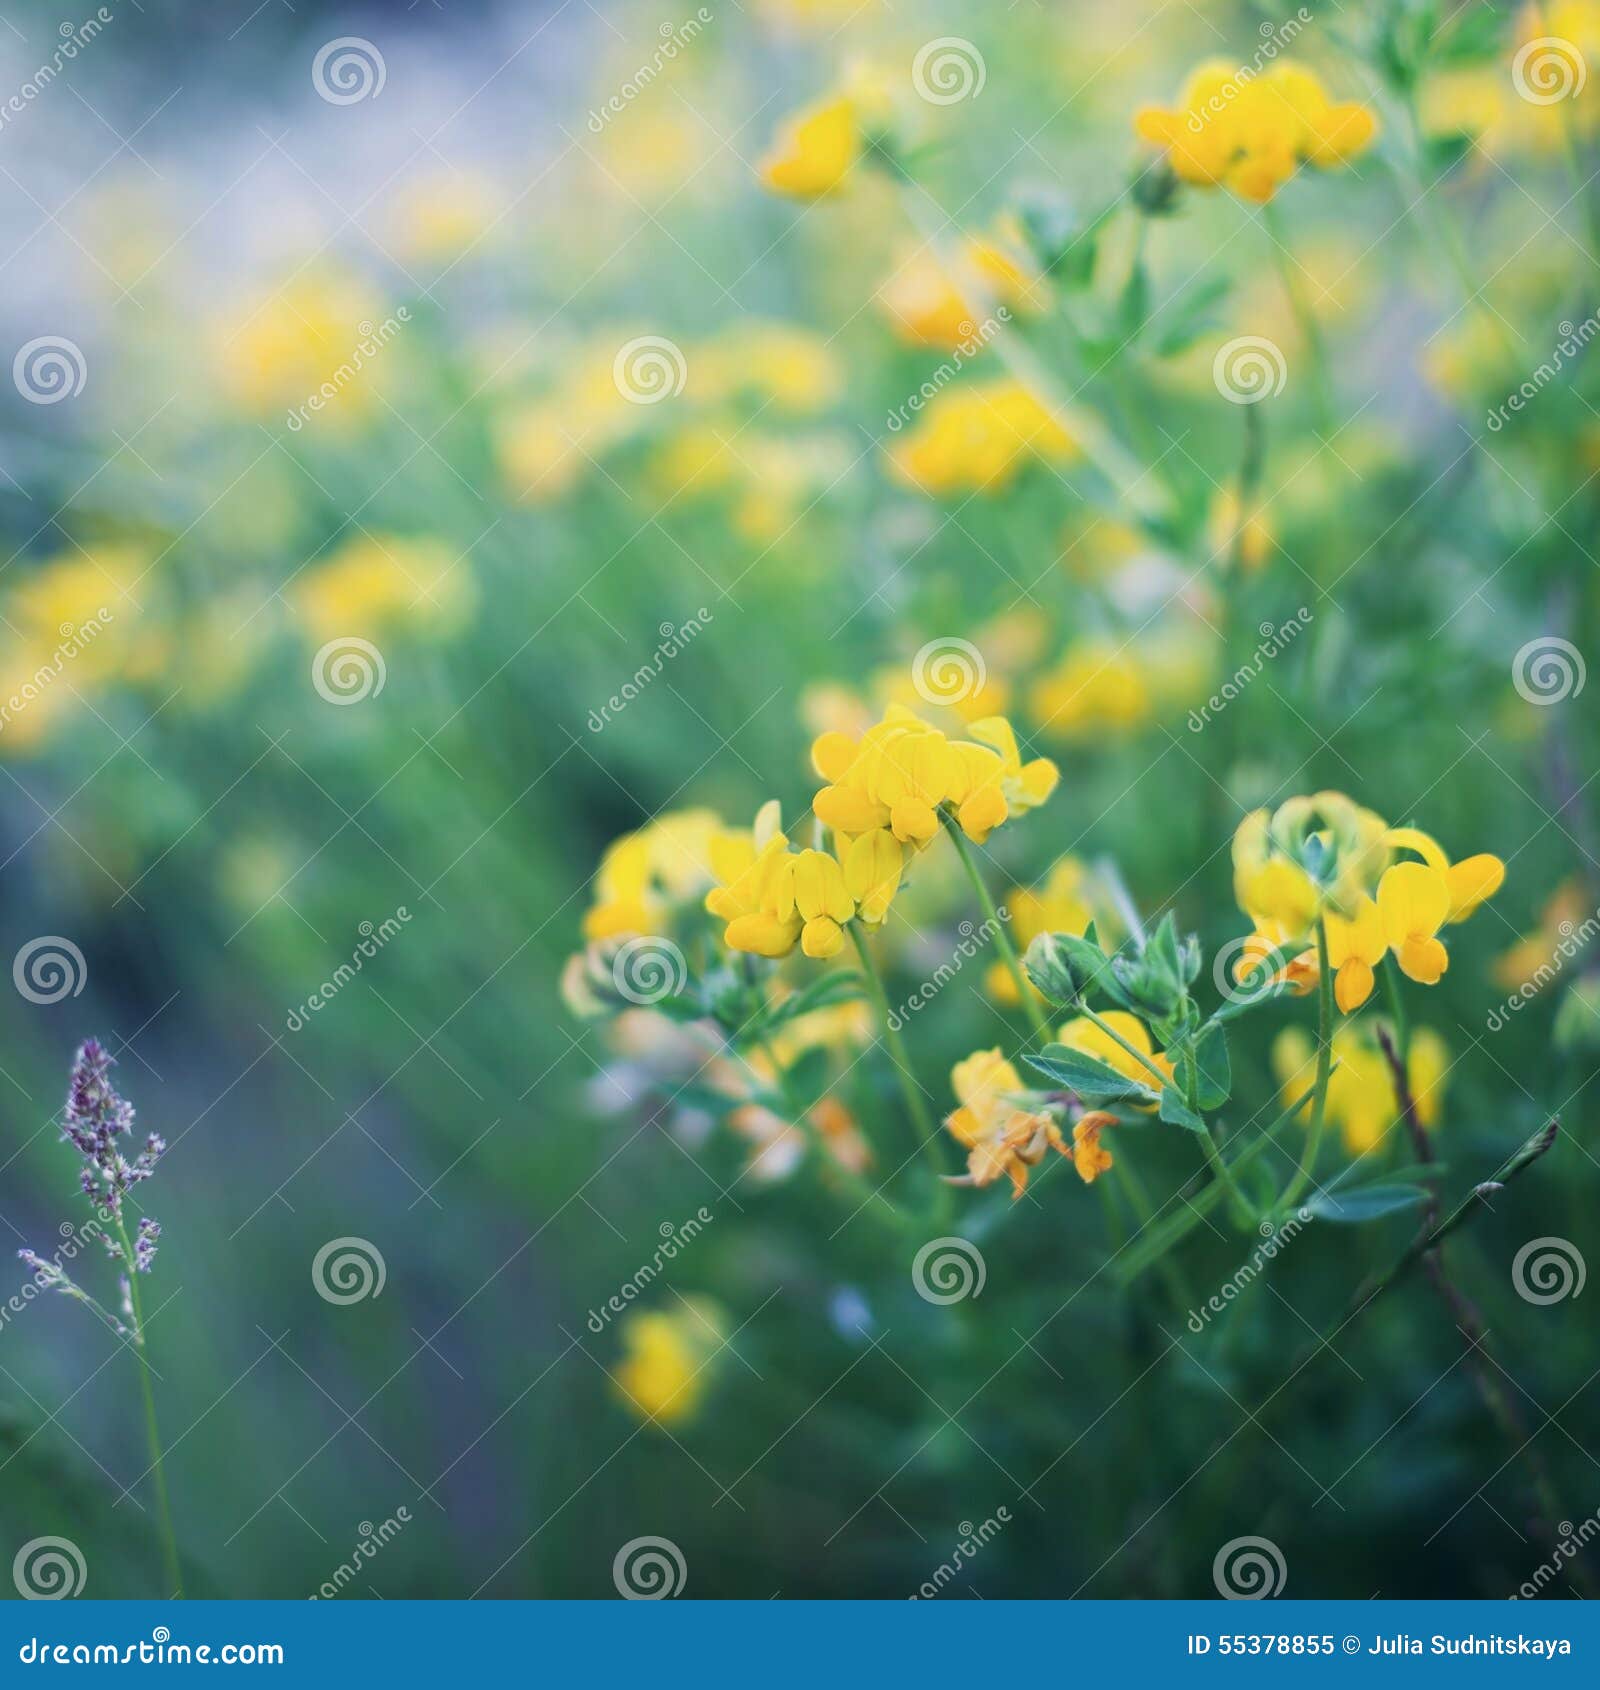 beautiful summer meadow with plant, grass and flowers, natural background, vintage toning